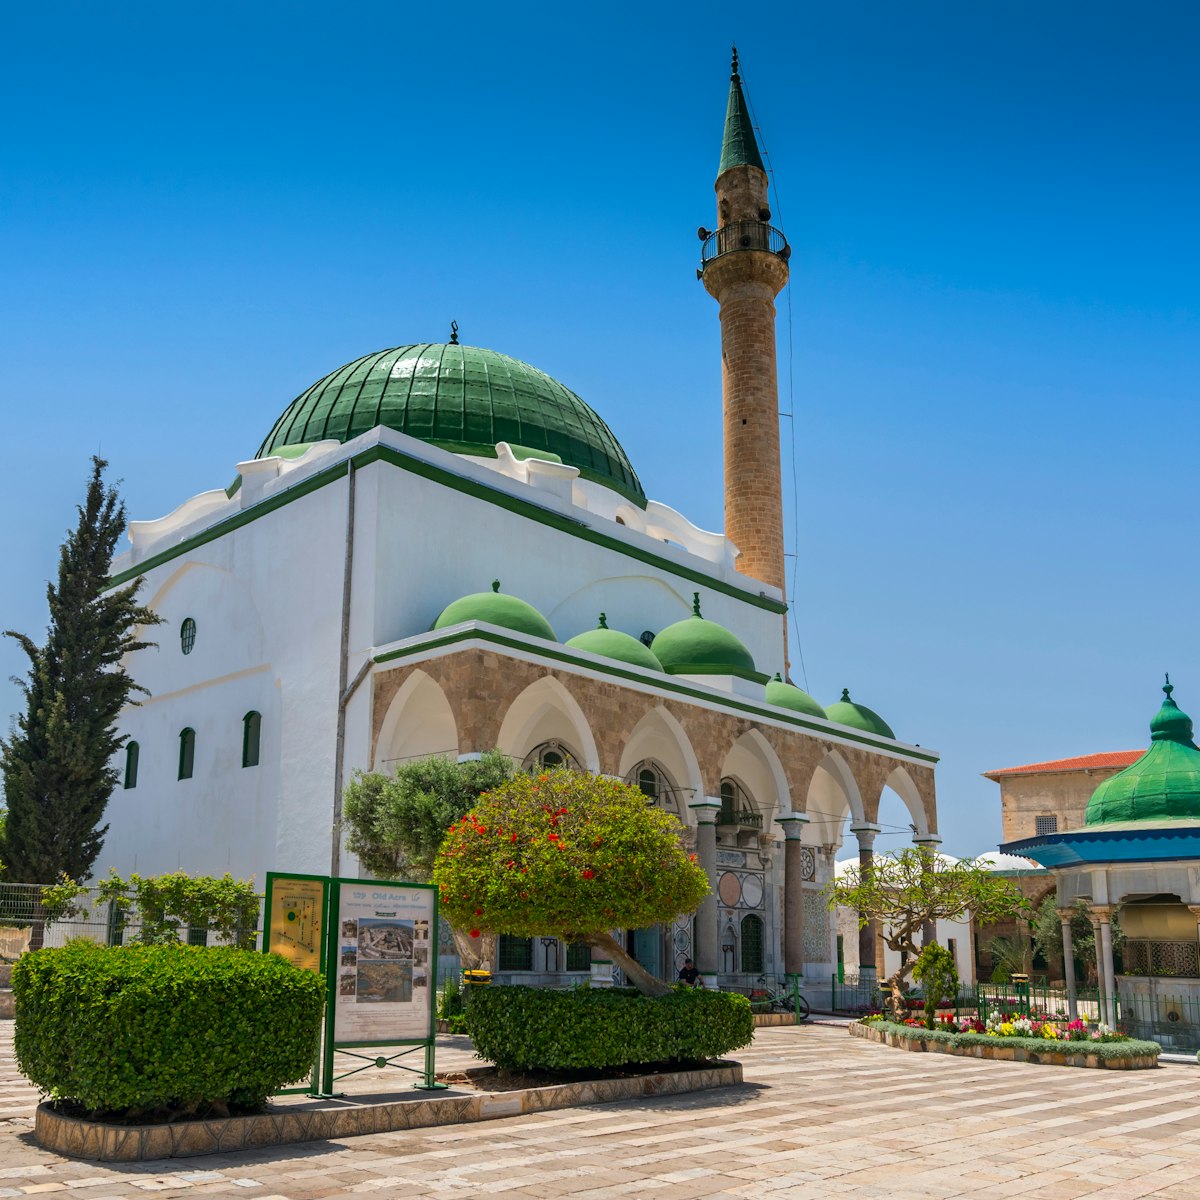 Al Jazzar mosque and courtyard, Acre, Israel.